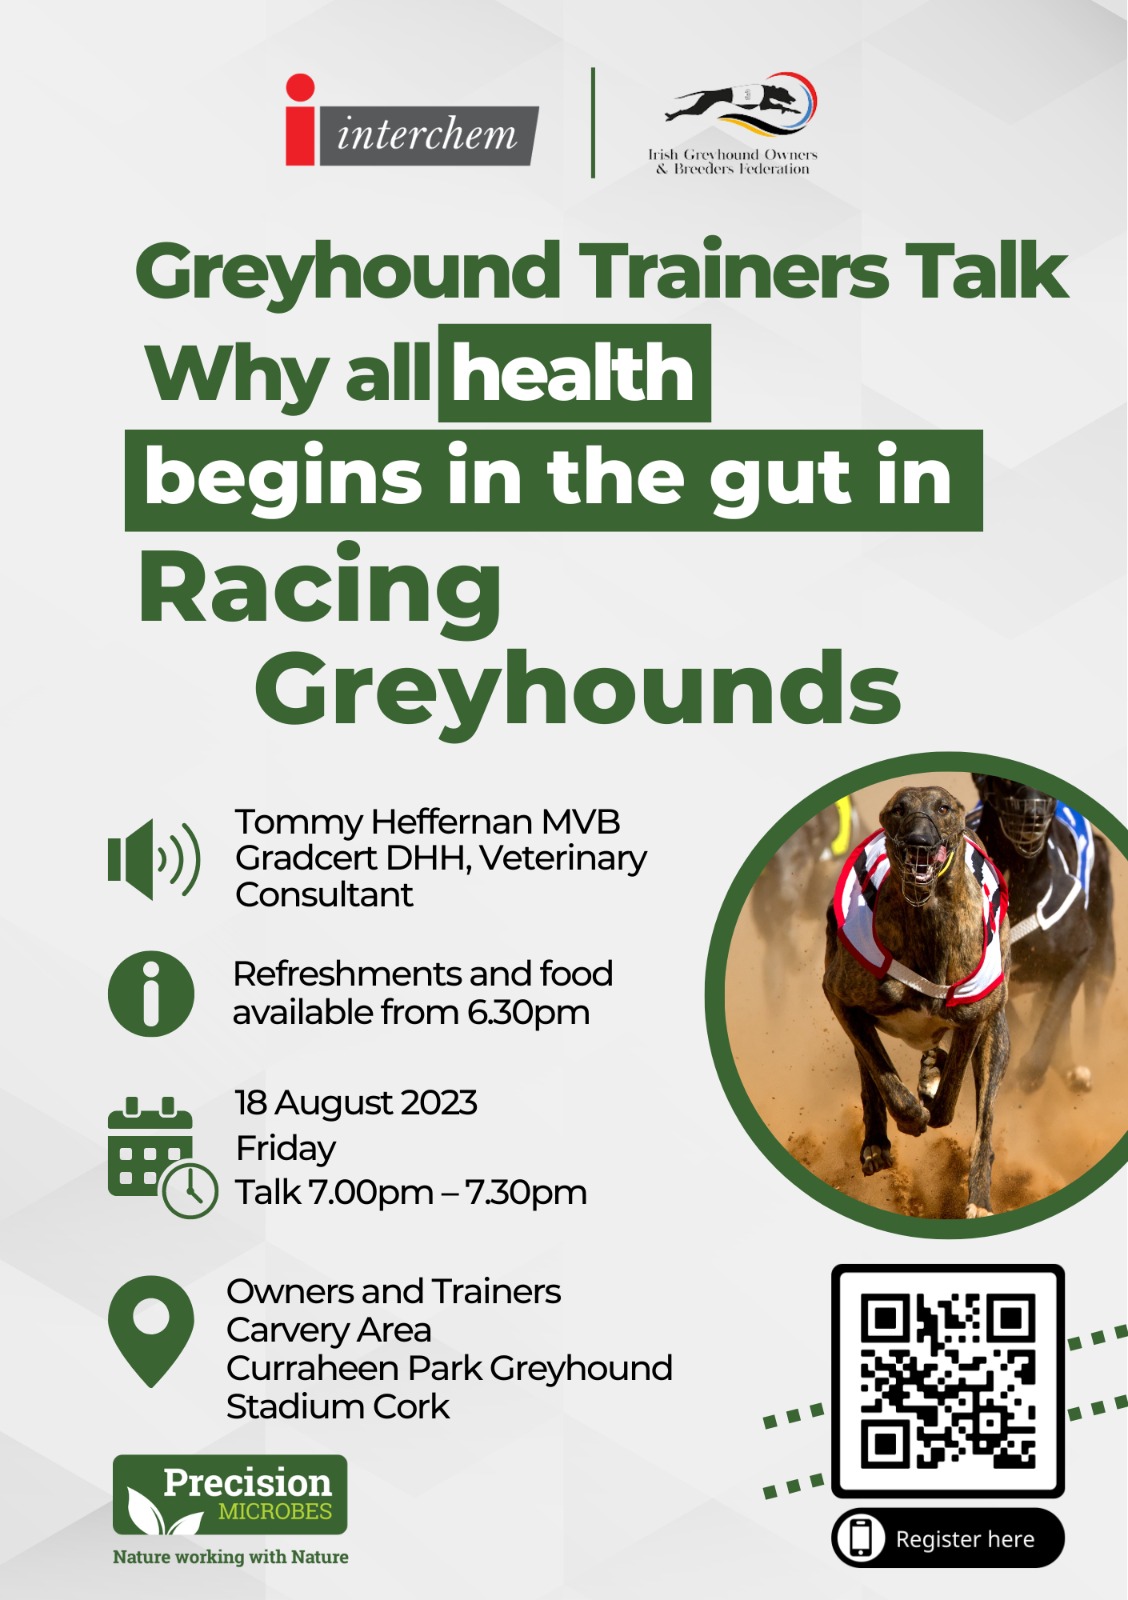 Join Interchem and Precision Microbes at the Owners and Trainers Carvery Area in Curraheen Park Greyhound Stadium, Cork for a talk on “Why all health begins in the gut in racing greyhounds”. Taking place on Friday 18th August with the speaker on the night, Tommy Heffernan MVB Gradcert DHH, Veterinary Consultant. 